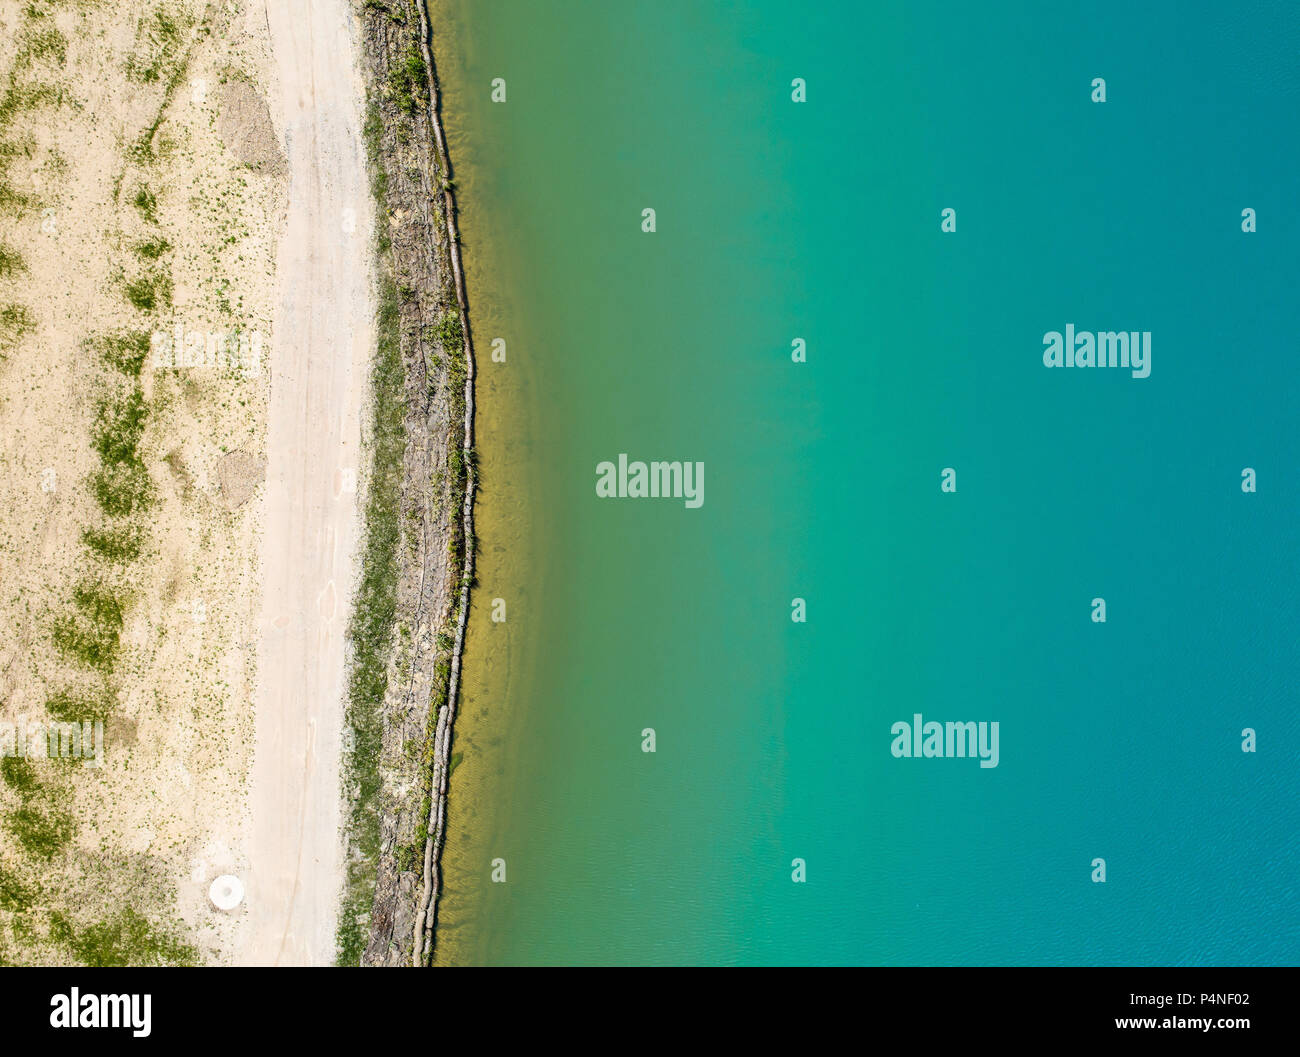 Detailed view of the edge of a rainwater retention basin with turquoise coloured water, abstract effect through vertical angle of view, Germany Stock Photo